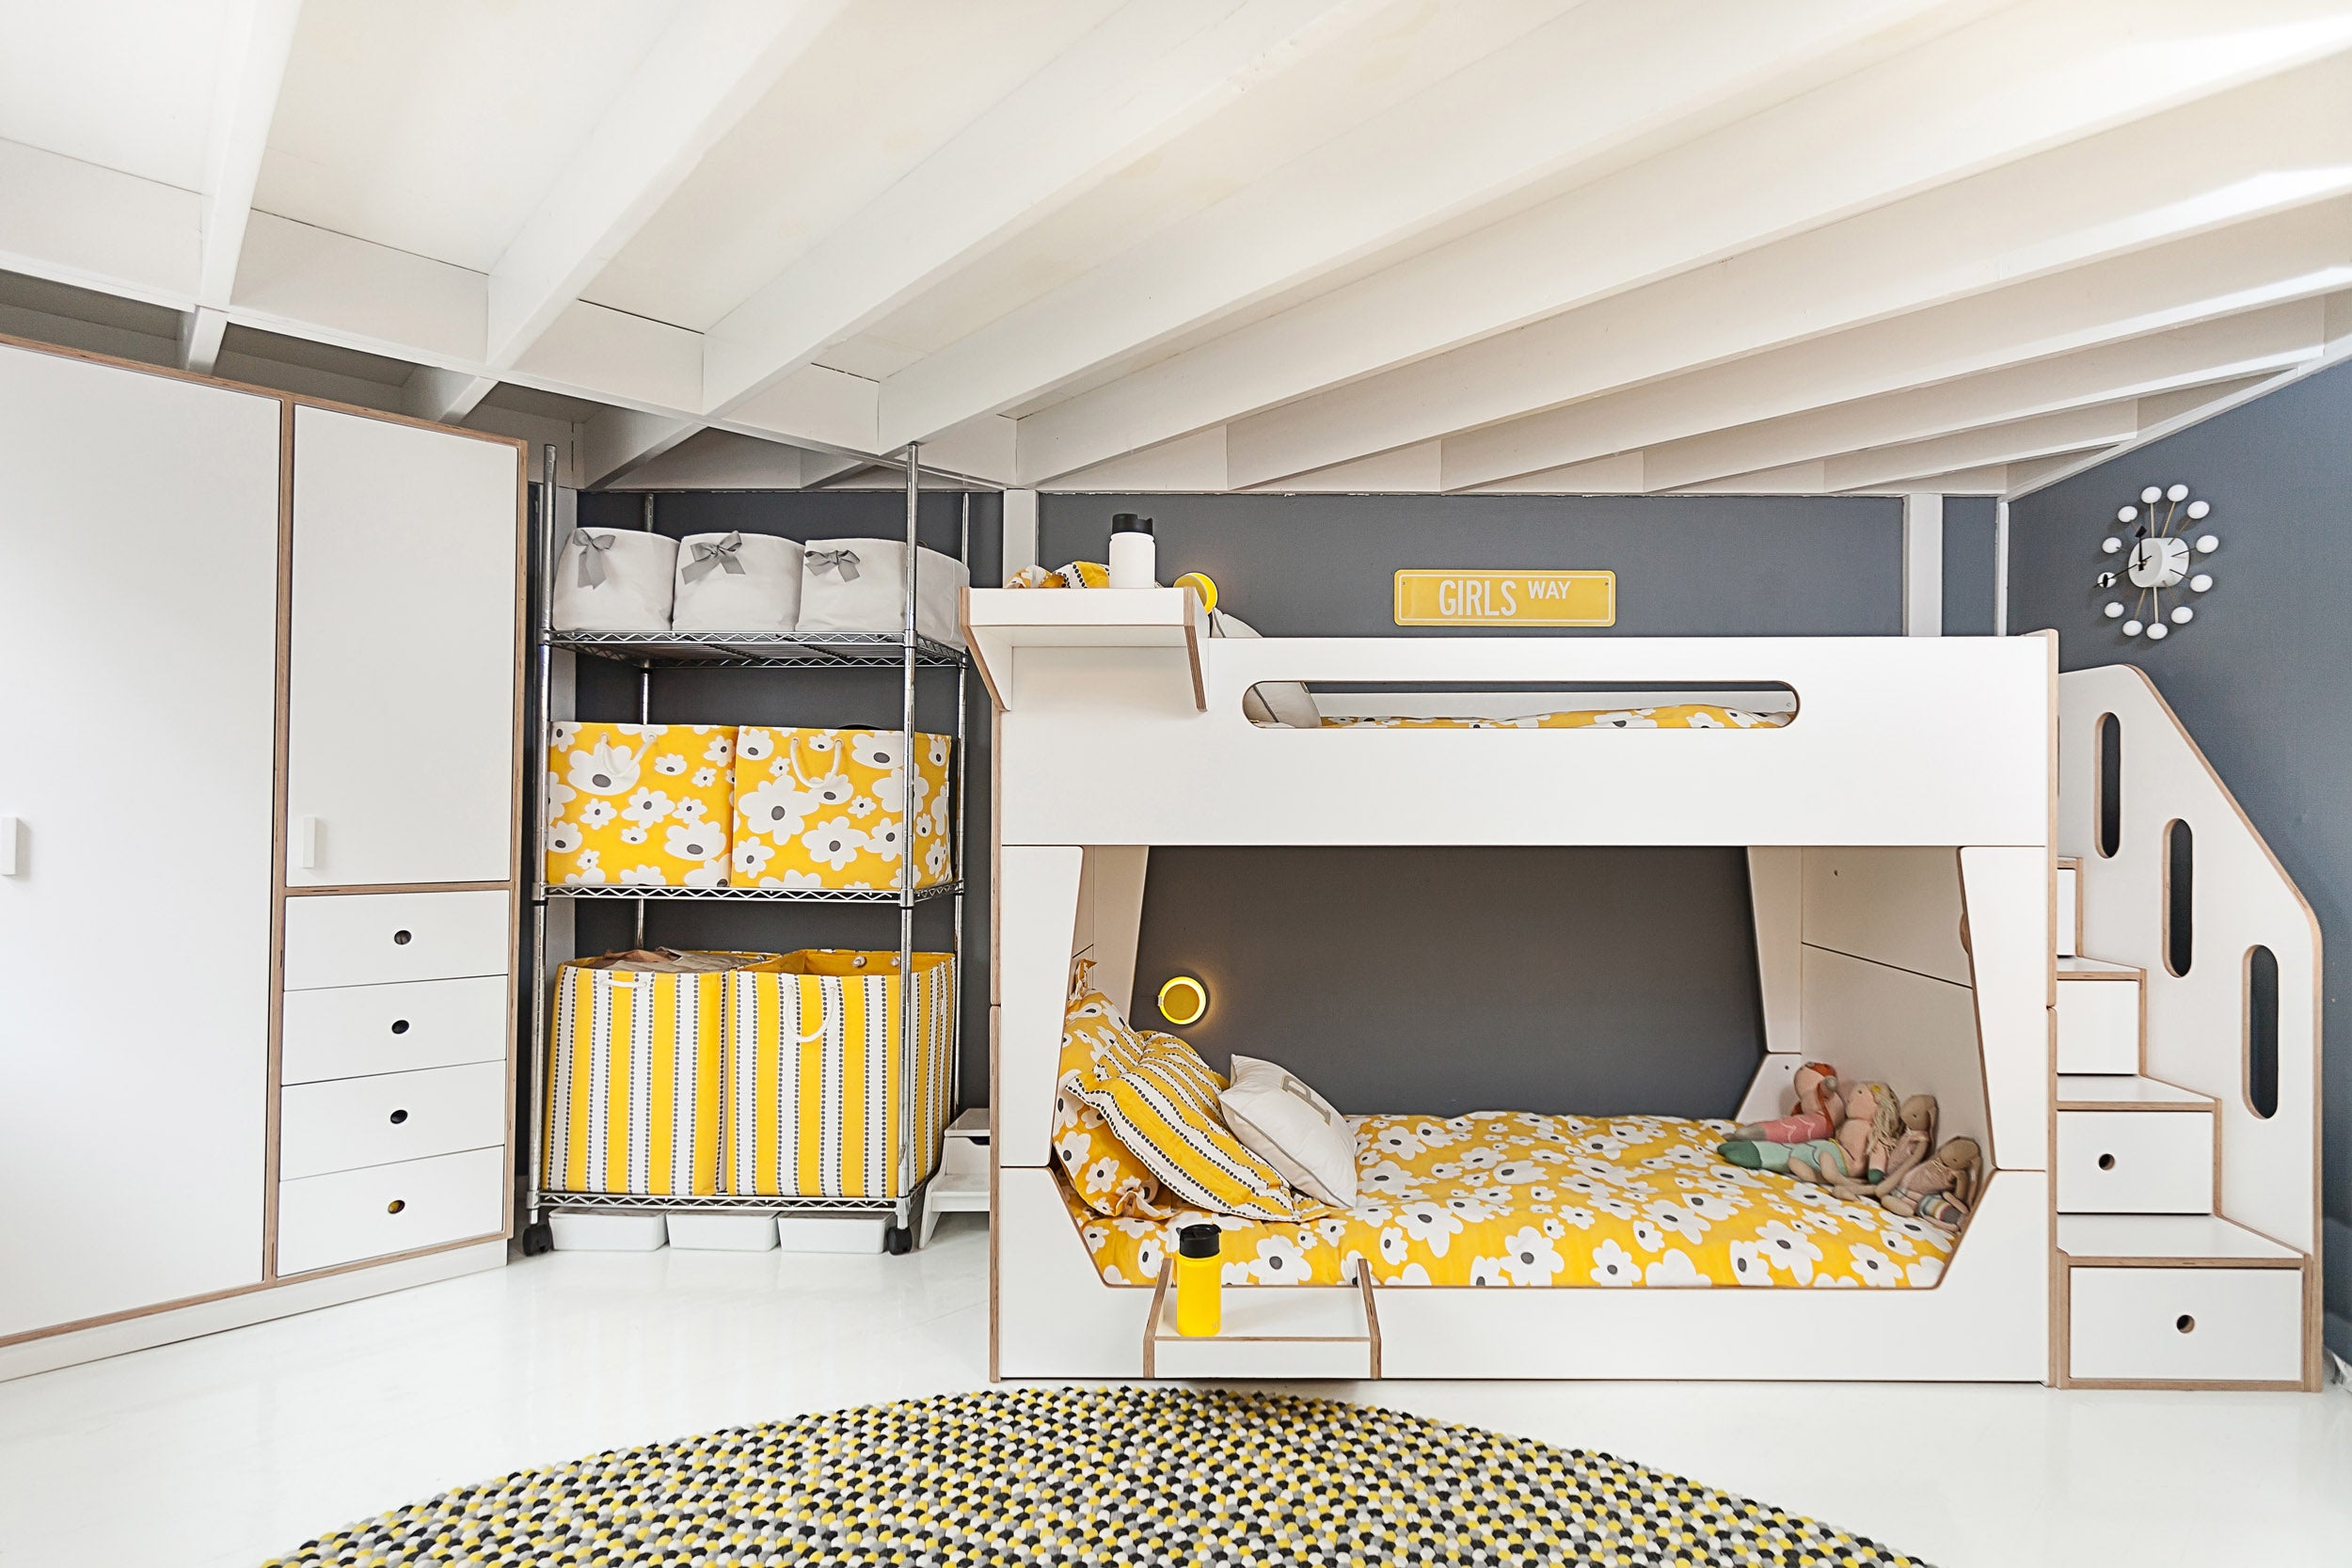 Kids’ room with bunk bed, yellow accents, storage, polka dot rug.